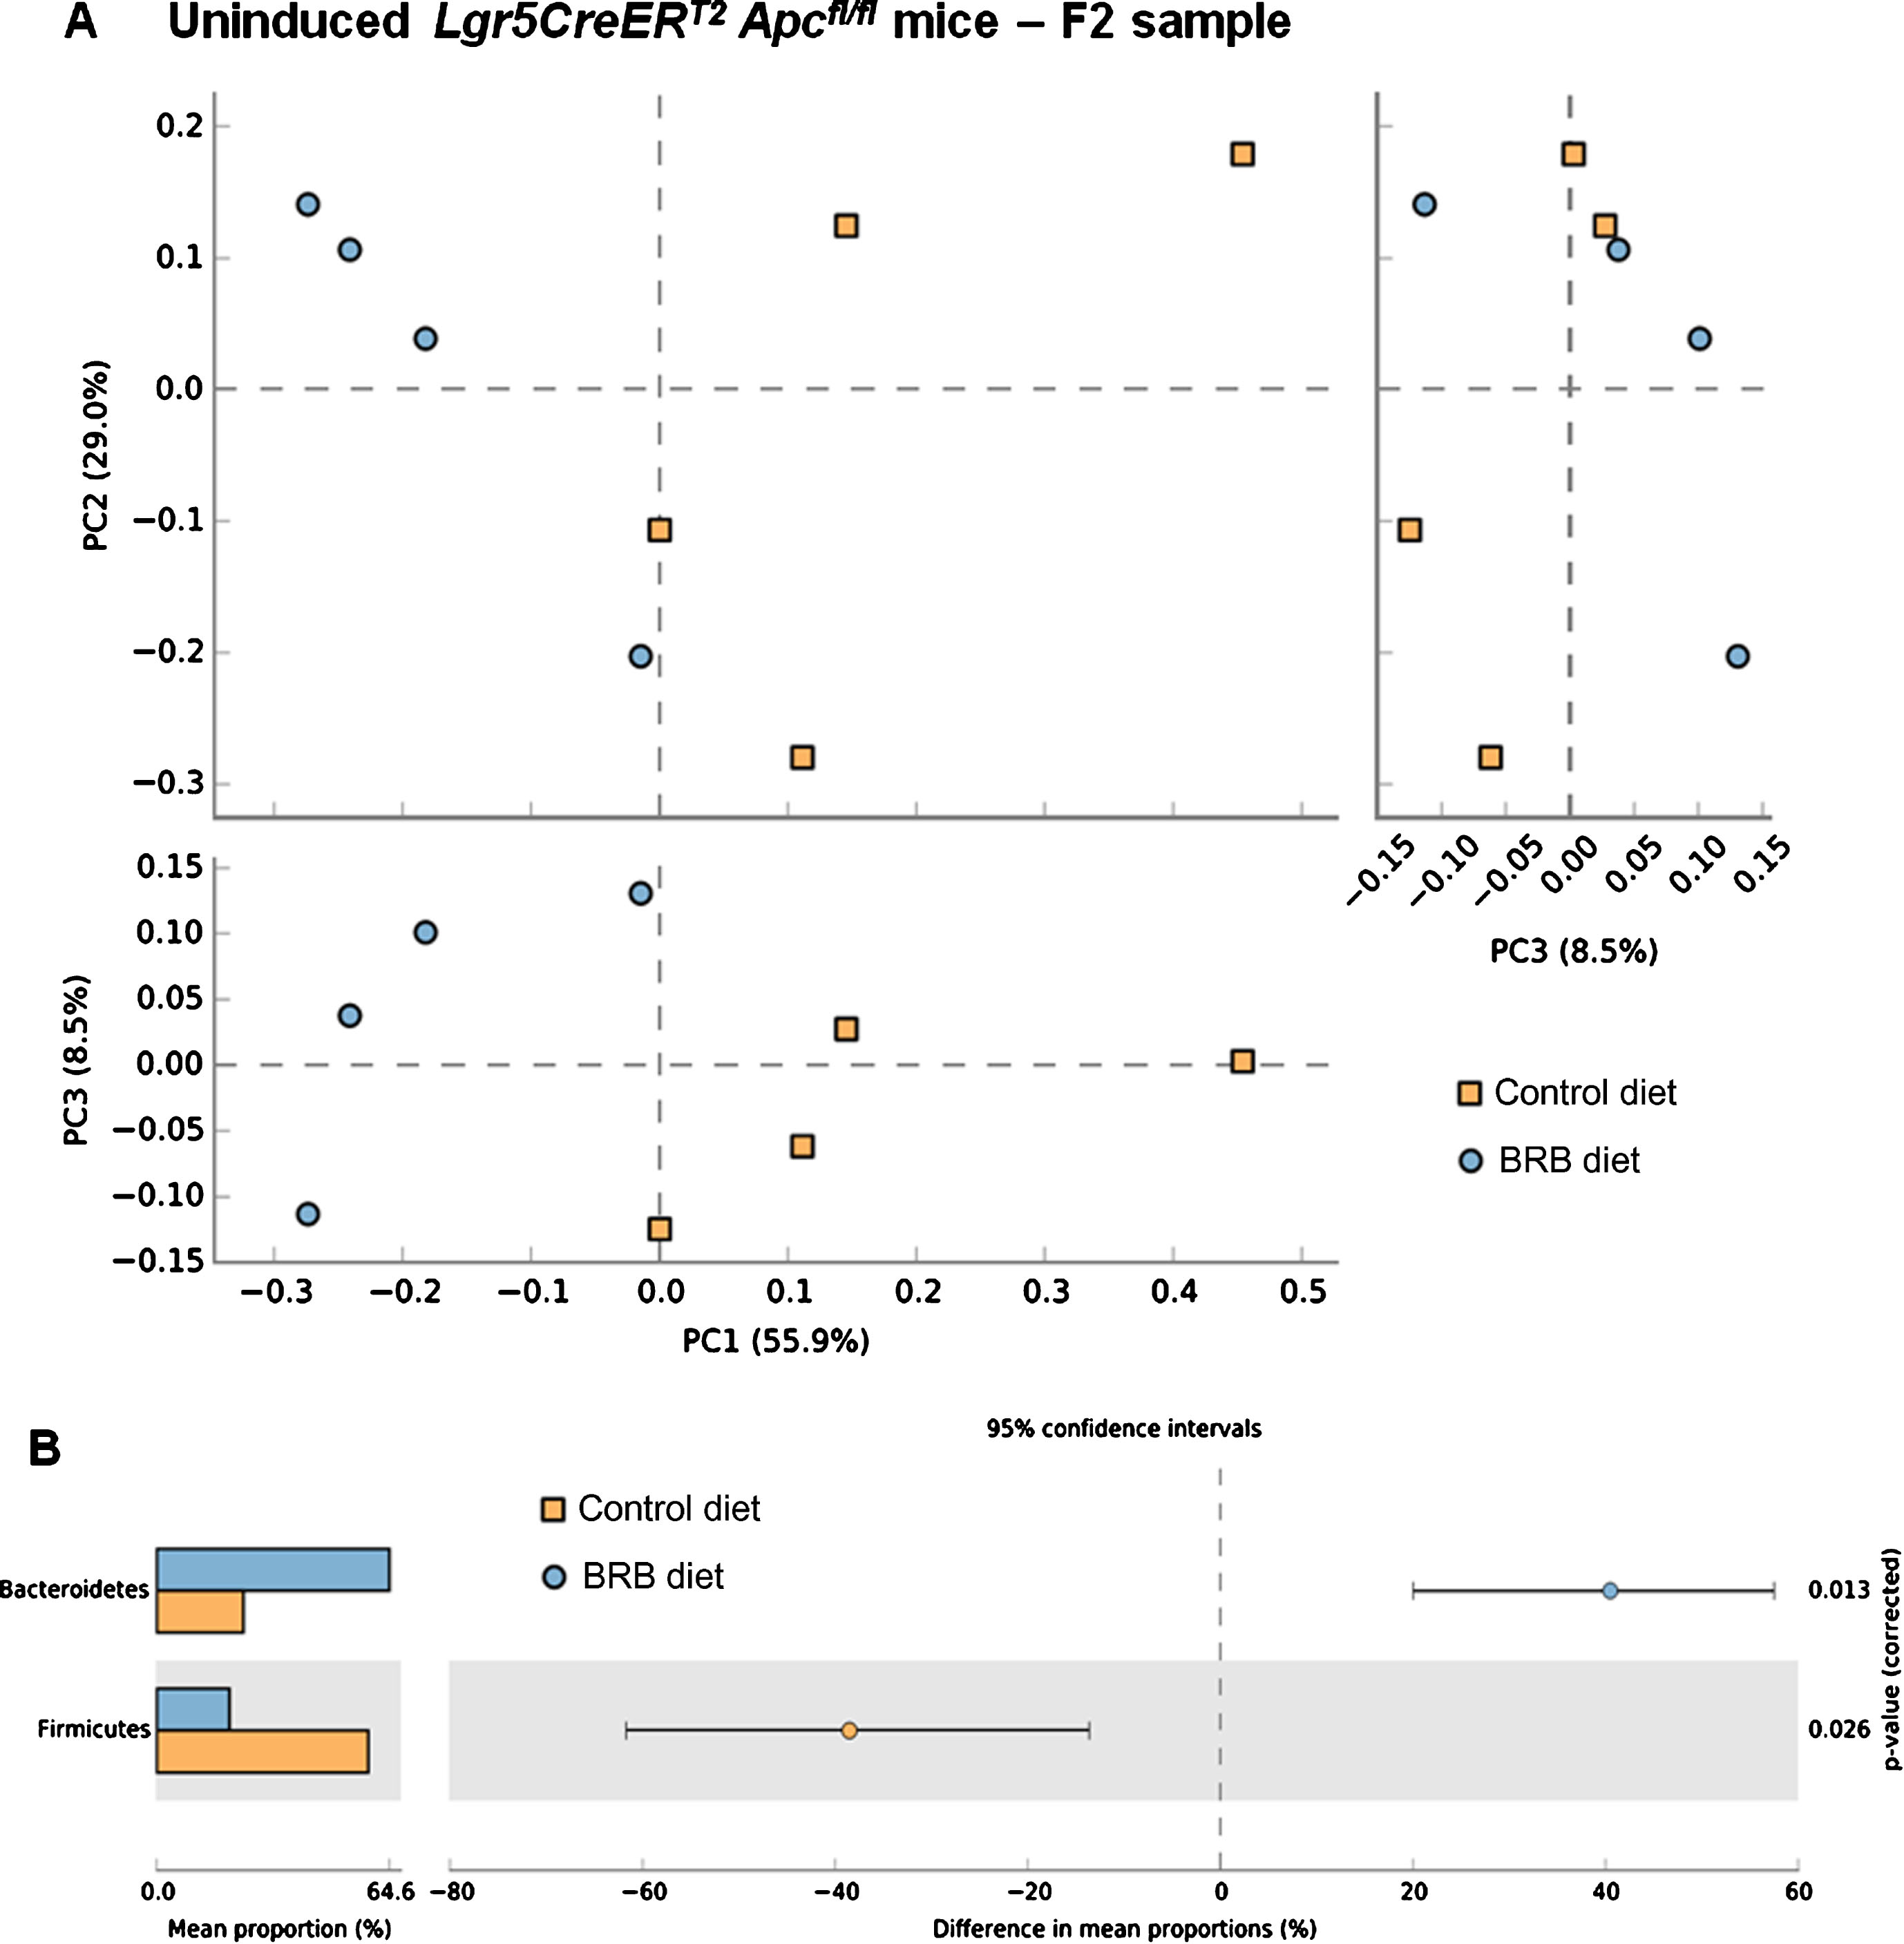 Consumption of a BRB diet alters microbial composition in the uninduced Lgr5CreERT2 Apcfl/flintestine. A) Comparison of faecal samples taken at the F2 (; AIN-76A control diet) and F2 (; BRB diet) sampling point from the uninduced Lgr5CreERT2 Apcfl/fl cohort. A PCA plot of the communities, based on the genera in each sample, indicates separation of the two groups when PC1 vs PC2 and PC1 vs PC3 are plotted, this result was supported by a PERMANOVA analysis in R. B) Pre-FDR analysis highlights 2 week feeding of BRBs resulted in an increased abundance of Bacteroidetes and reduced Firmicutes compared to control fed mice however, when an FDR is applied no one genus was shown to alter due to the feeding intervention, but the whole community shifted its composition in response to the BRB diet. N = 4 mice per cohort, error bars represent 95% confidence intervals using the DP:bootstrap method (DP = difference between mean proportions).